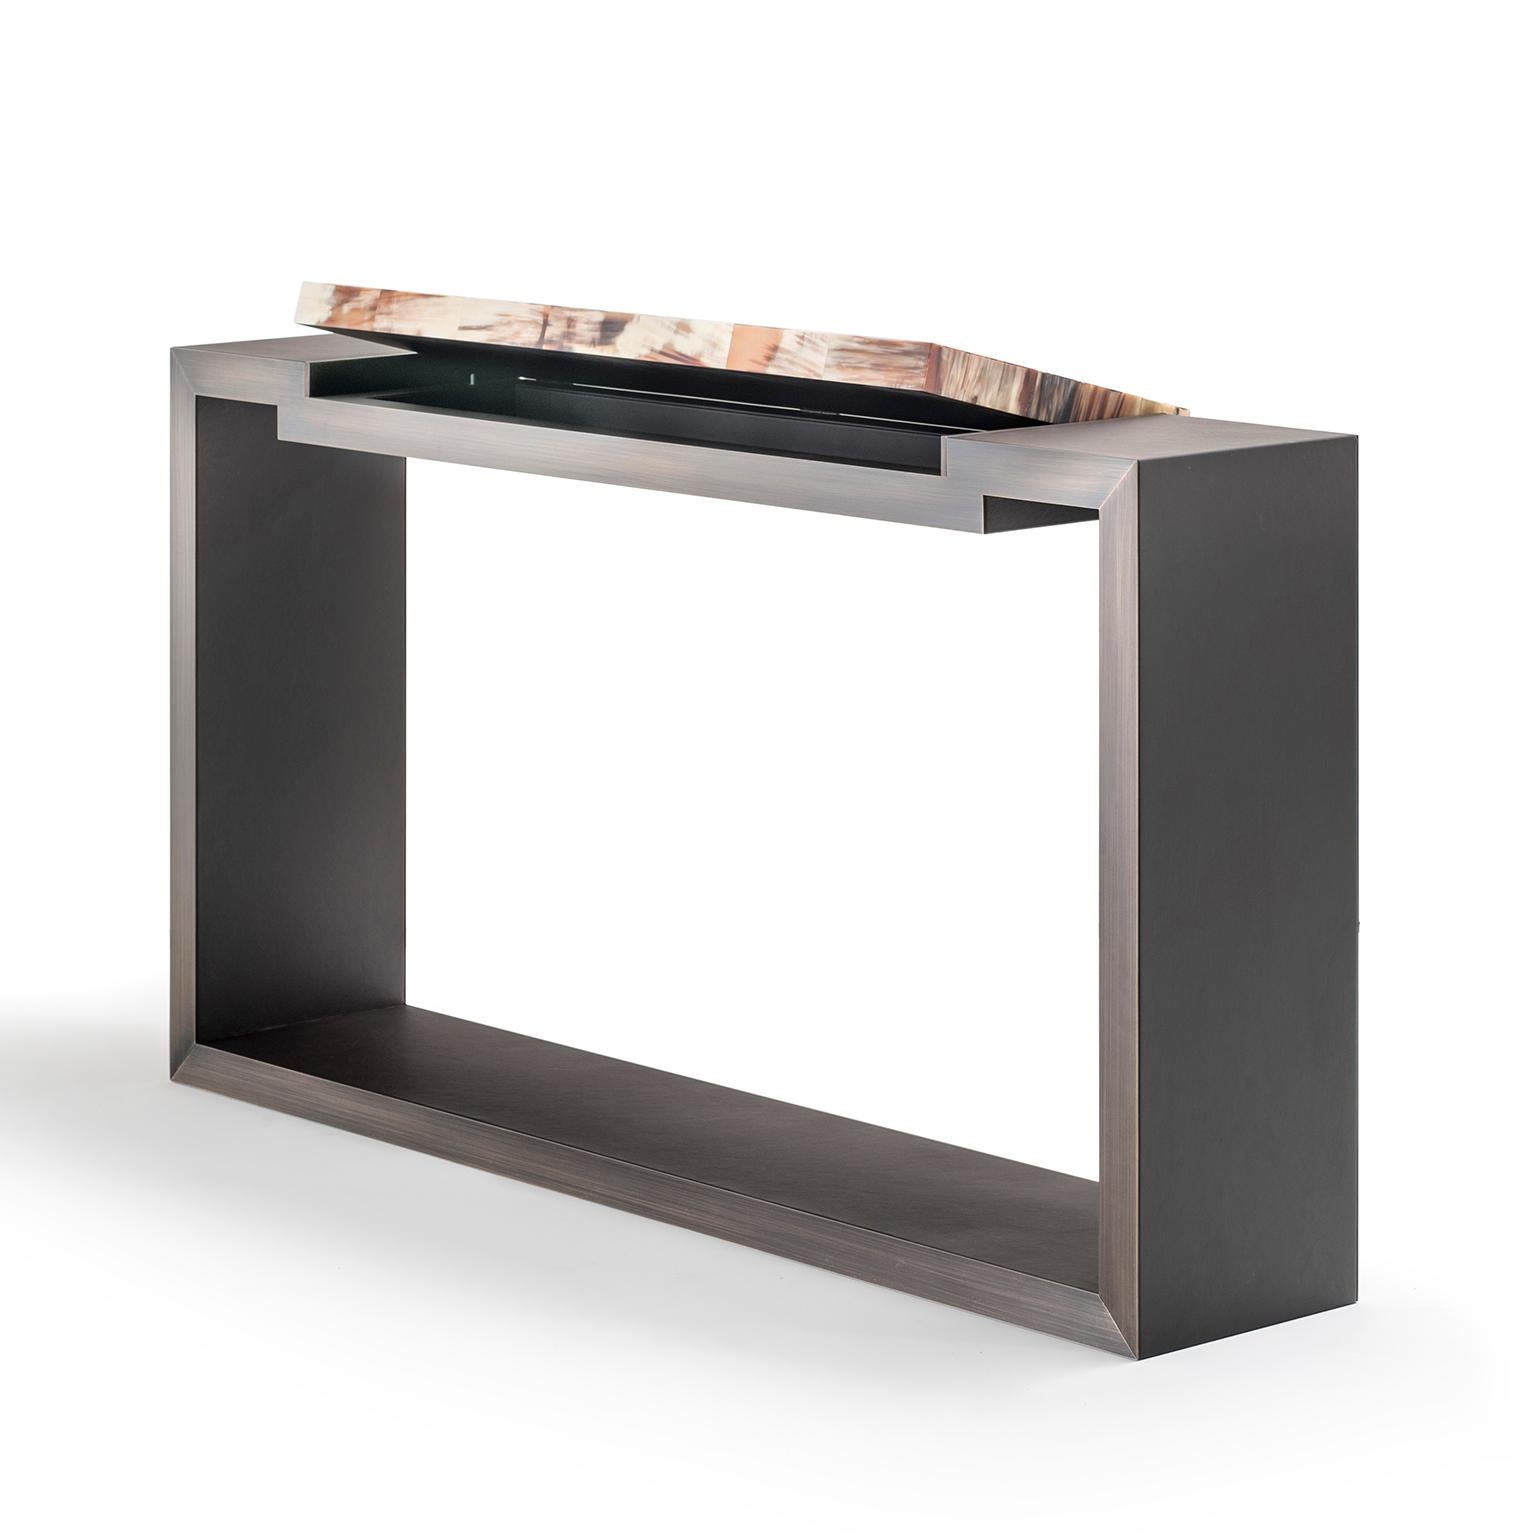 Functionality and aesthetics meld together in Essenziale console table, handcrafted of dark brown Tosca leather (cat. Super). Equipped with an elegant secretaire in Corno Italiano, boasting warm and inviting color tones with matte finish, the